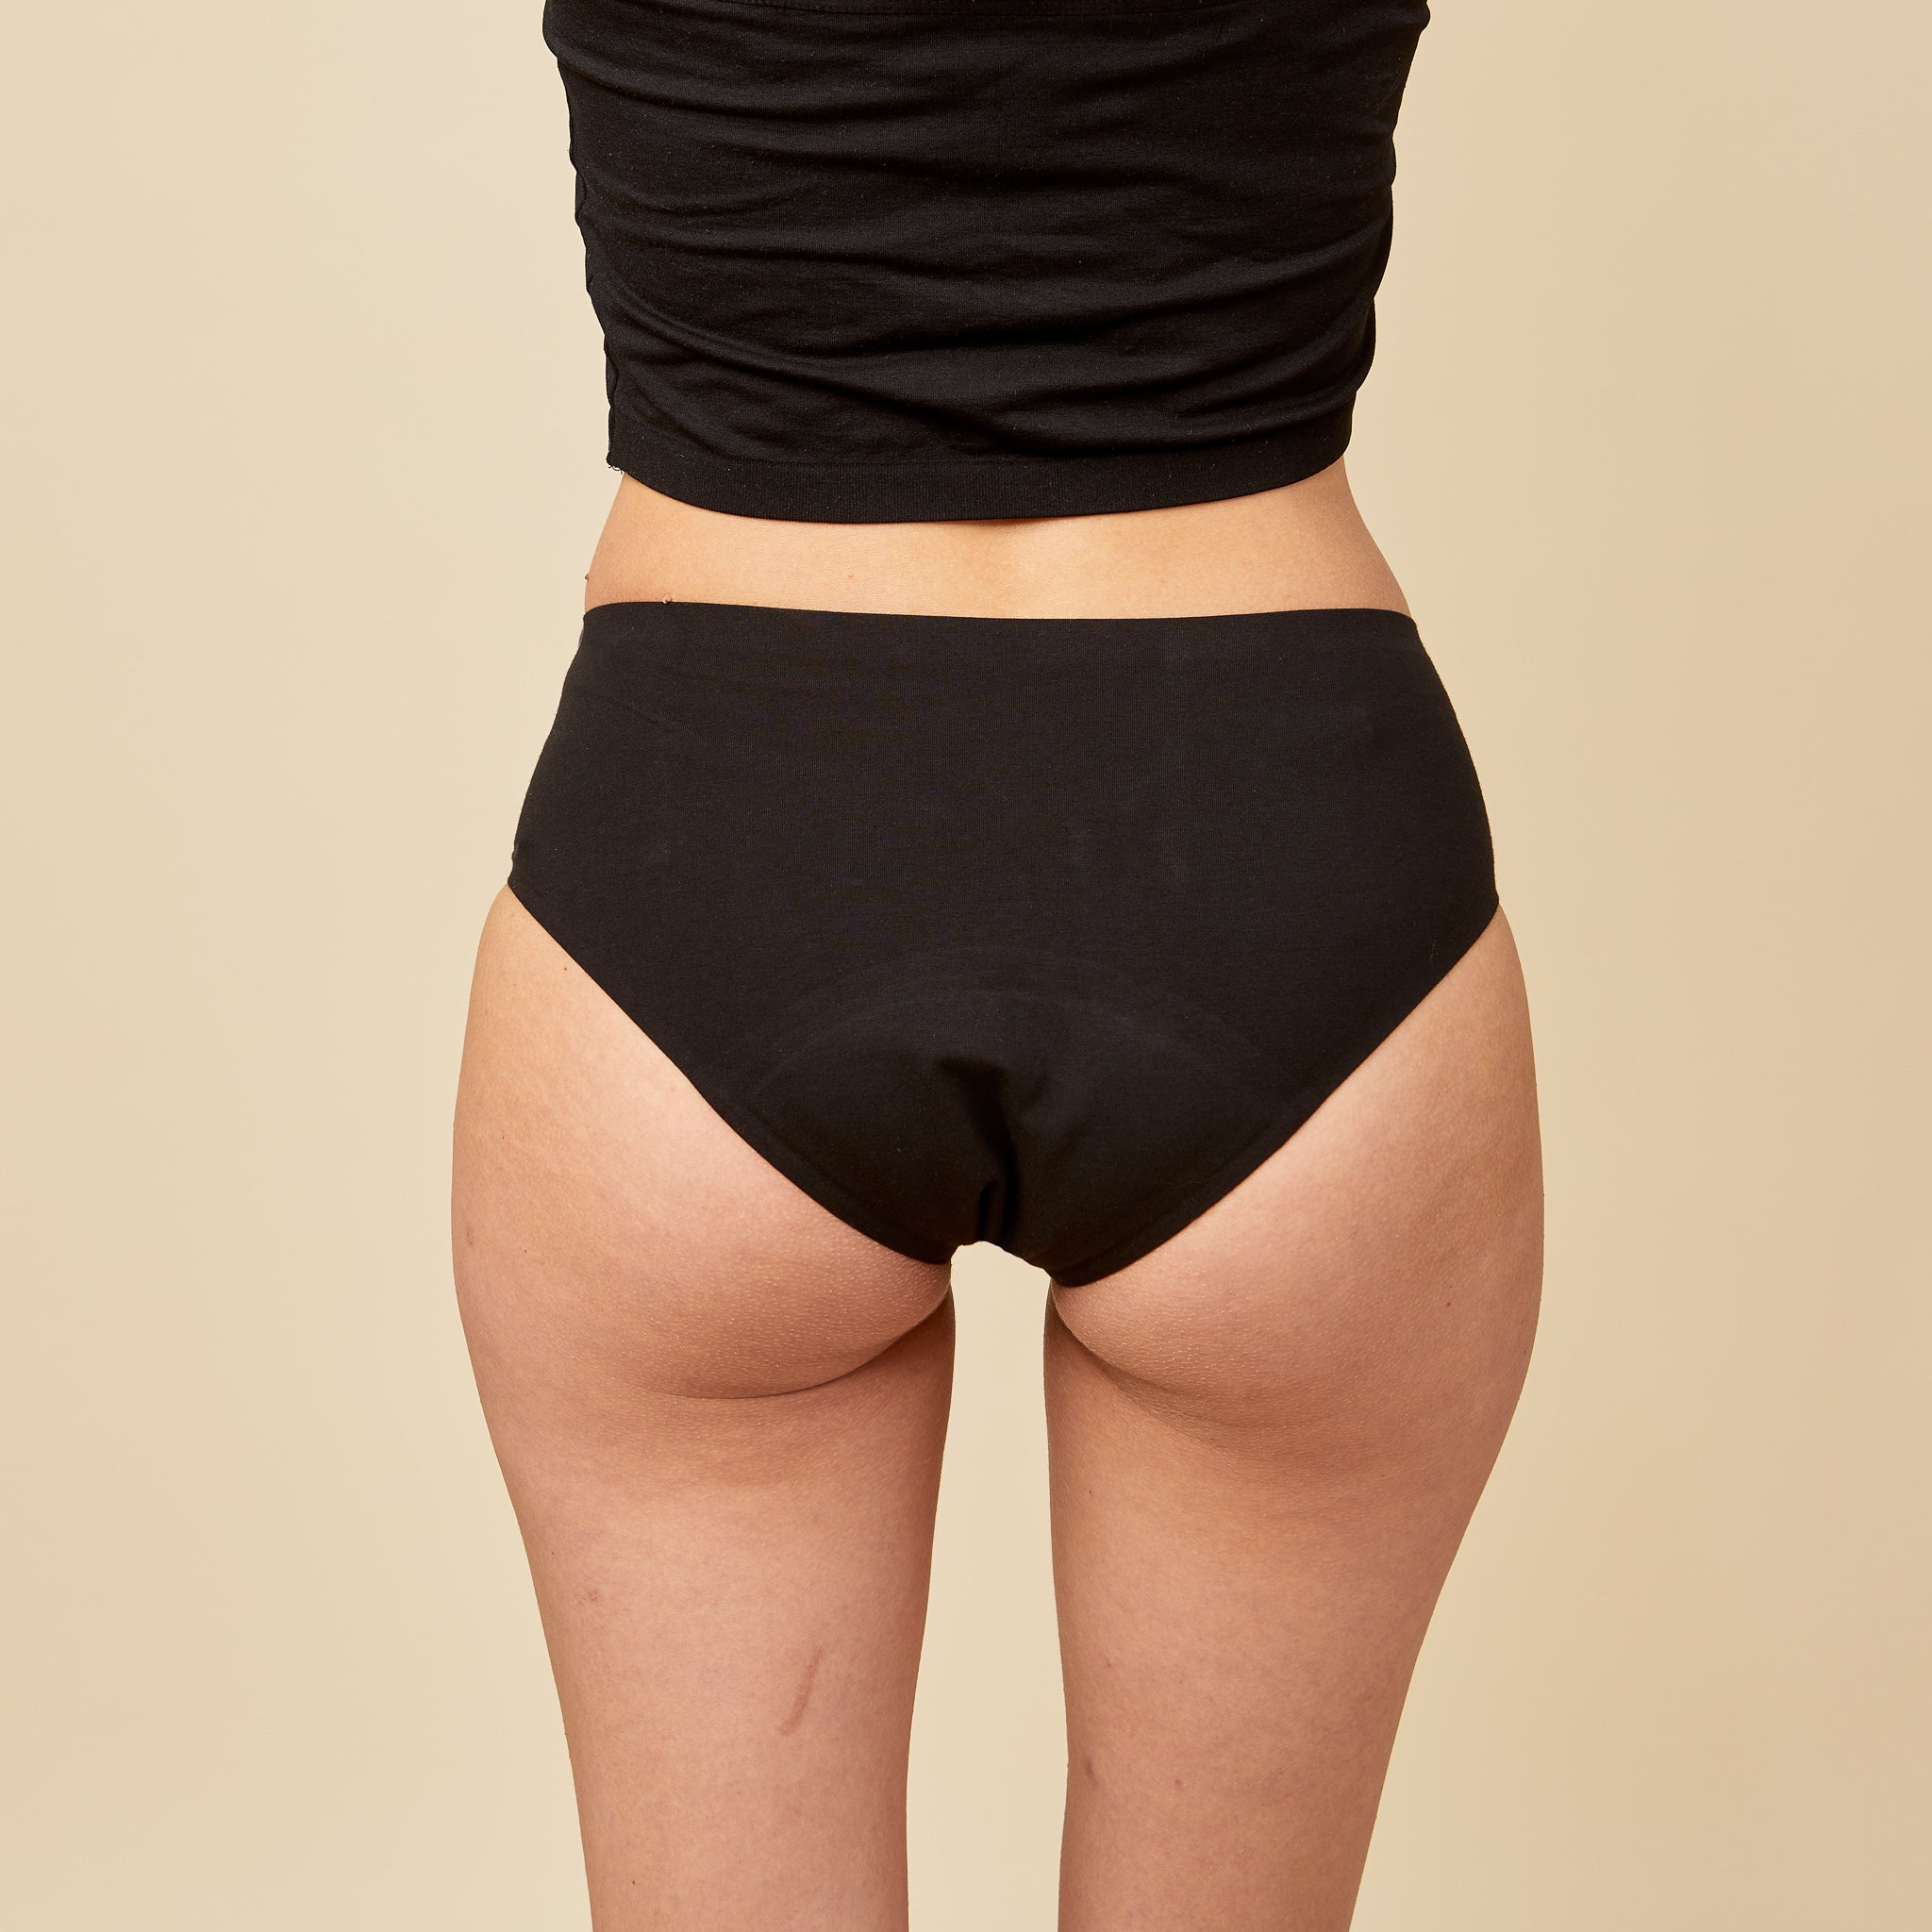 dais Hipster Period Underwear made of organic cotton shown worn by a model from the back showing the seamless and hipster cut.